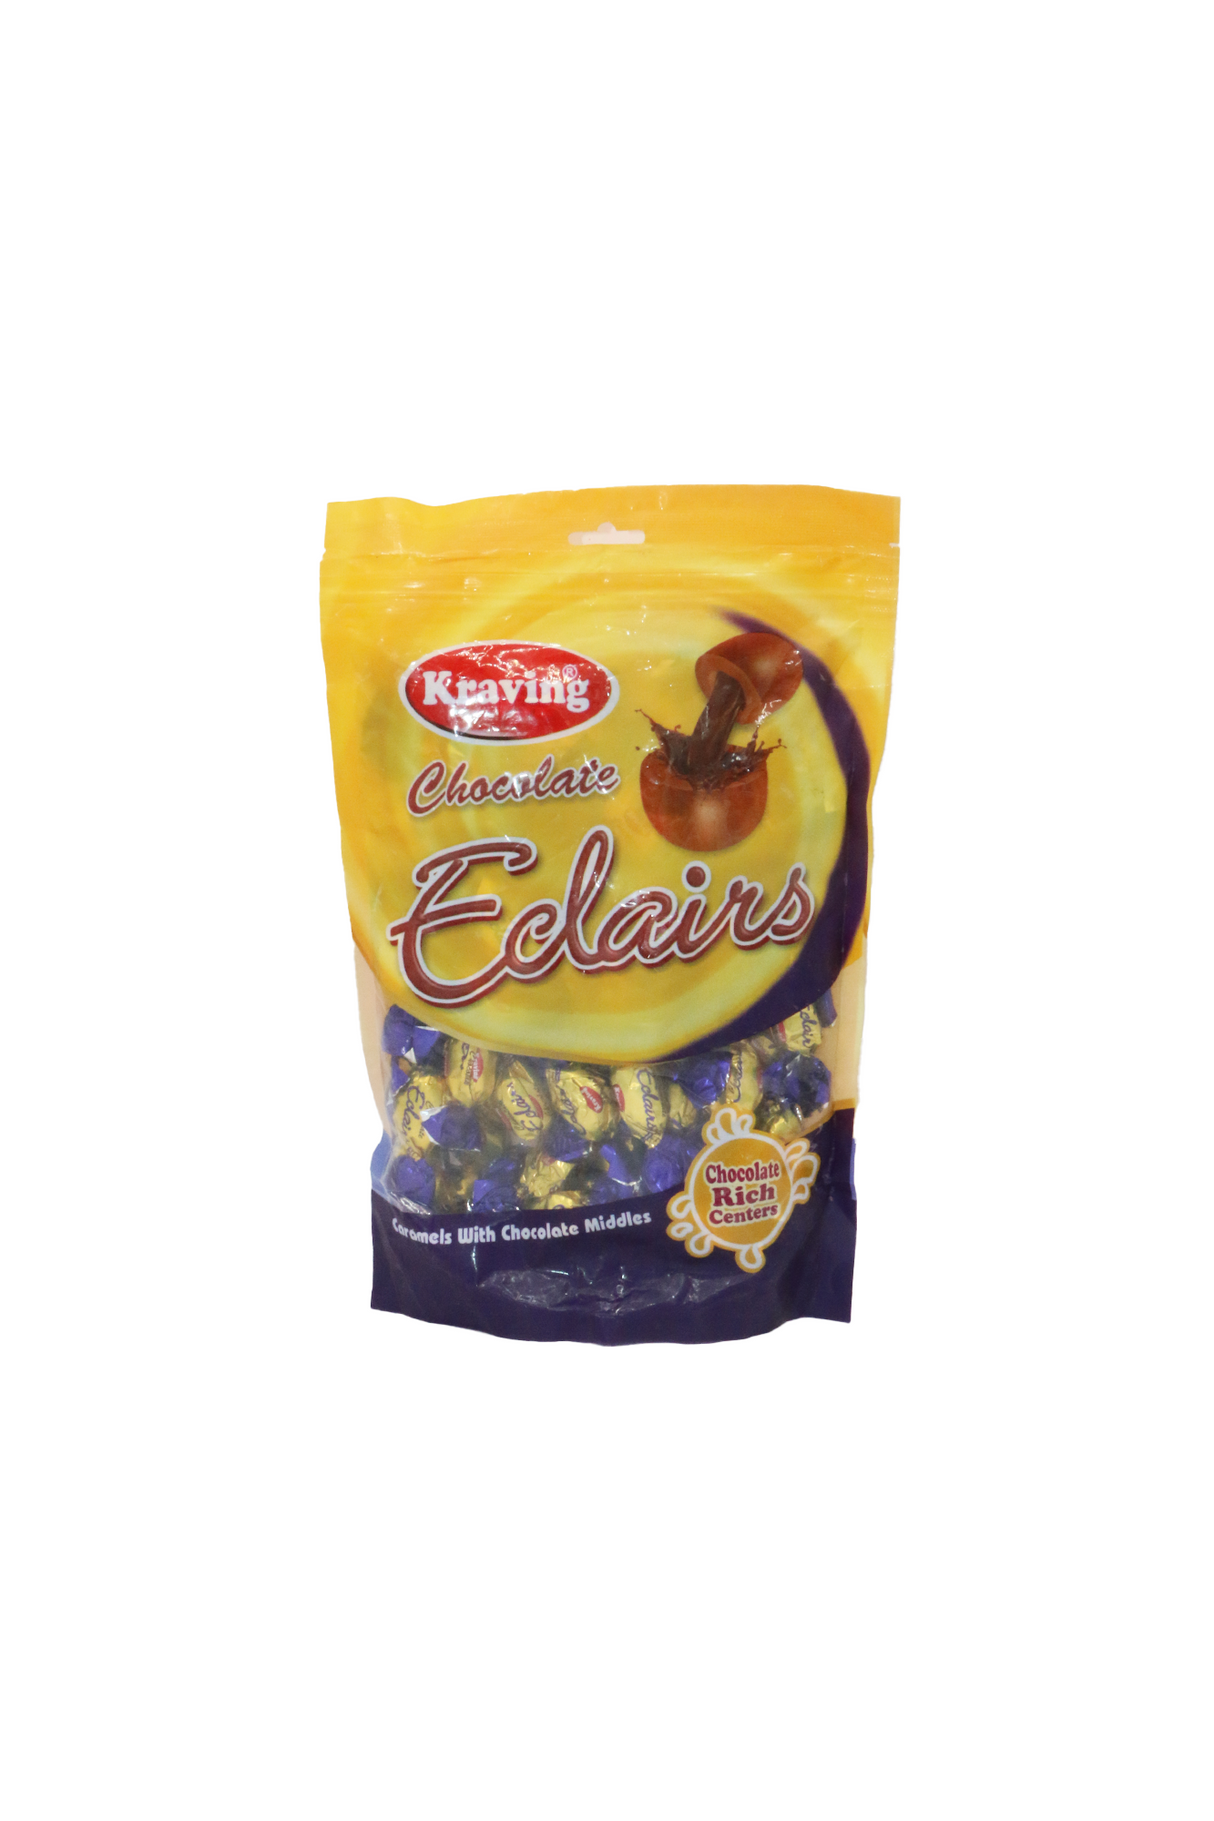 kraving candy choclate eclairs 350g